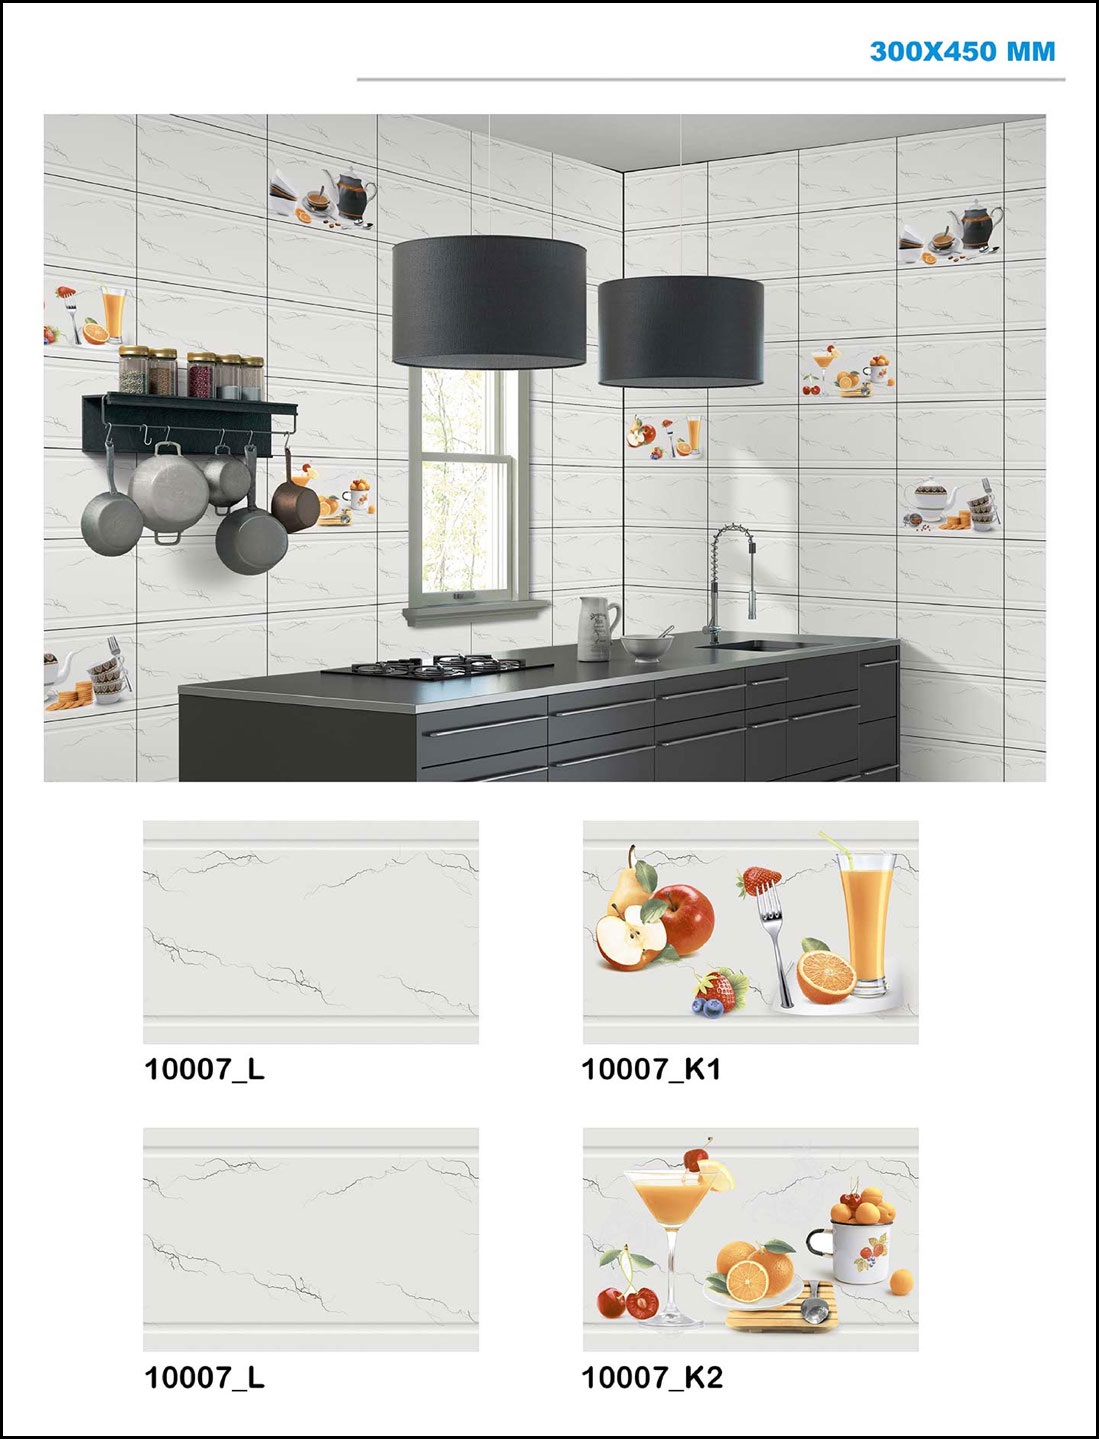 12x18 Kitchen Tiles | 12x18 Kitchen Wall Tiles with texture, color and